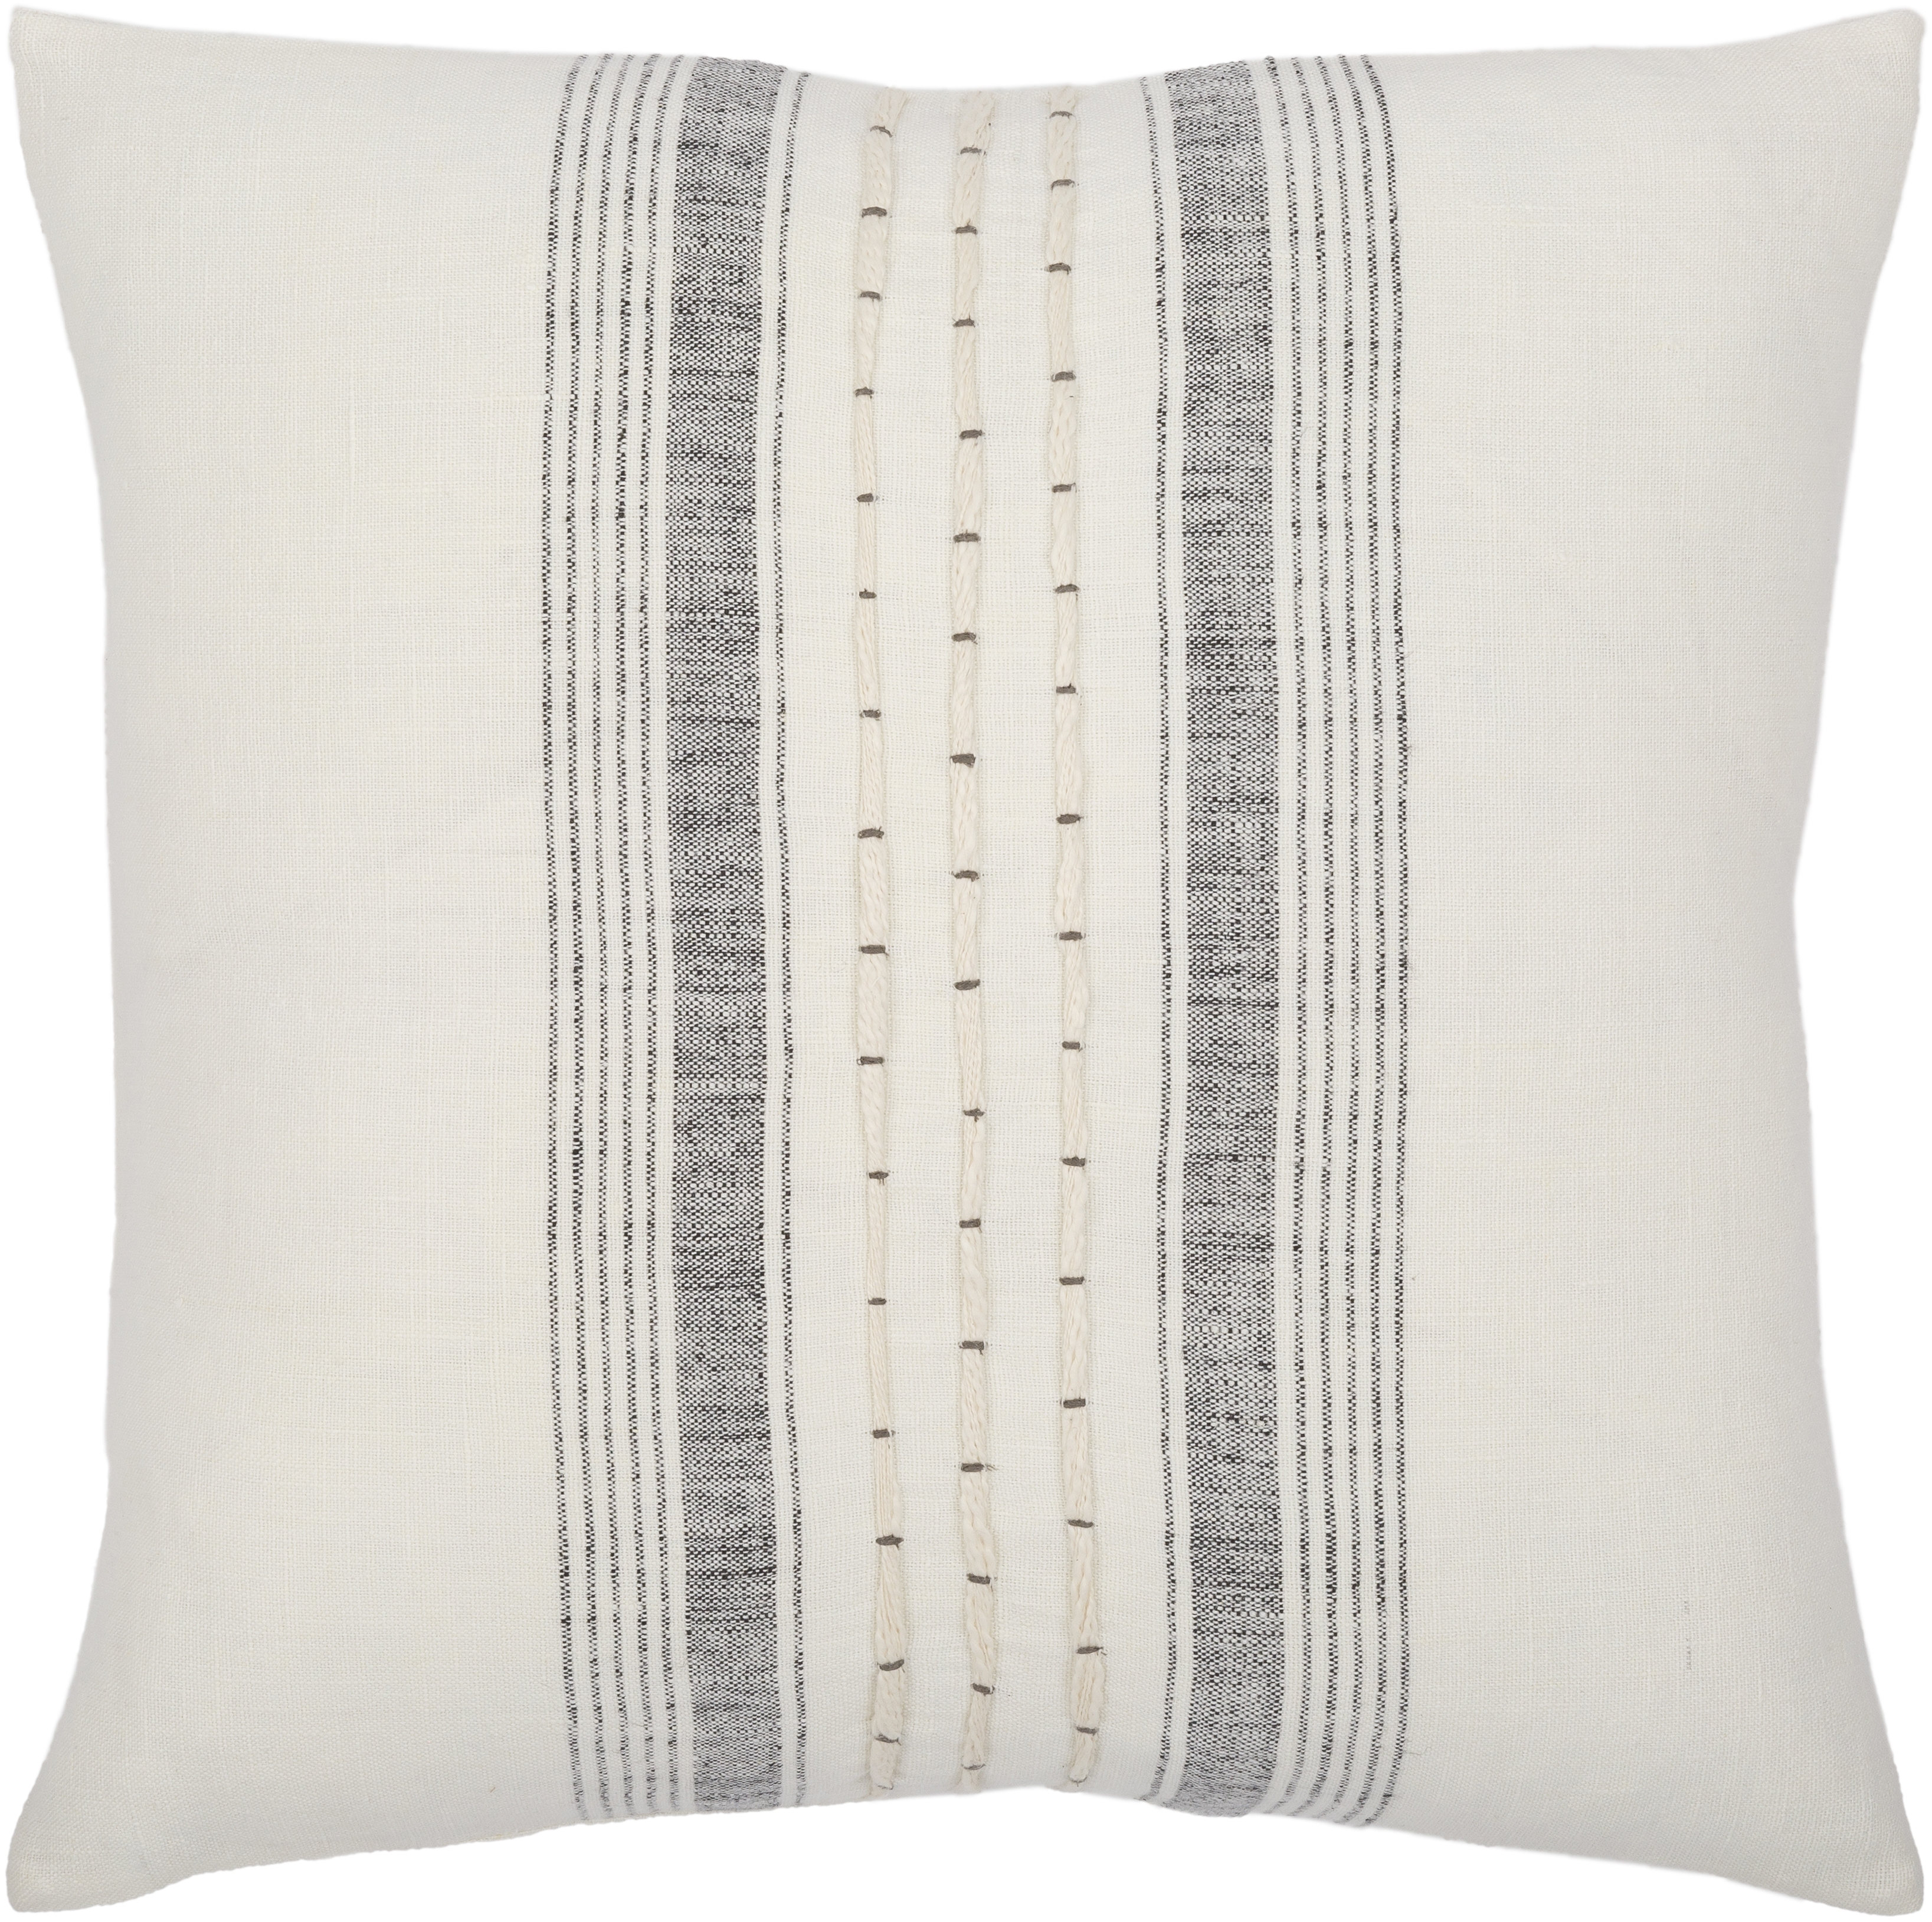 Linen Stripe Embellished Throw Pillow, 18" x 18", with poly insert - Image 0